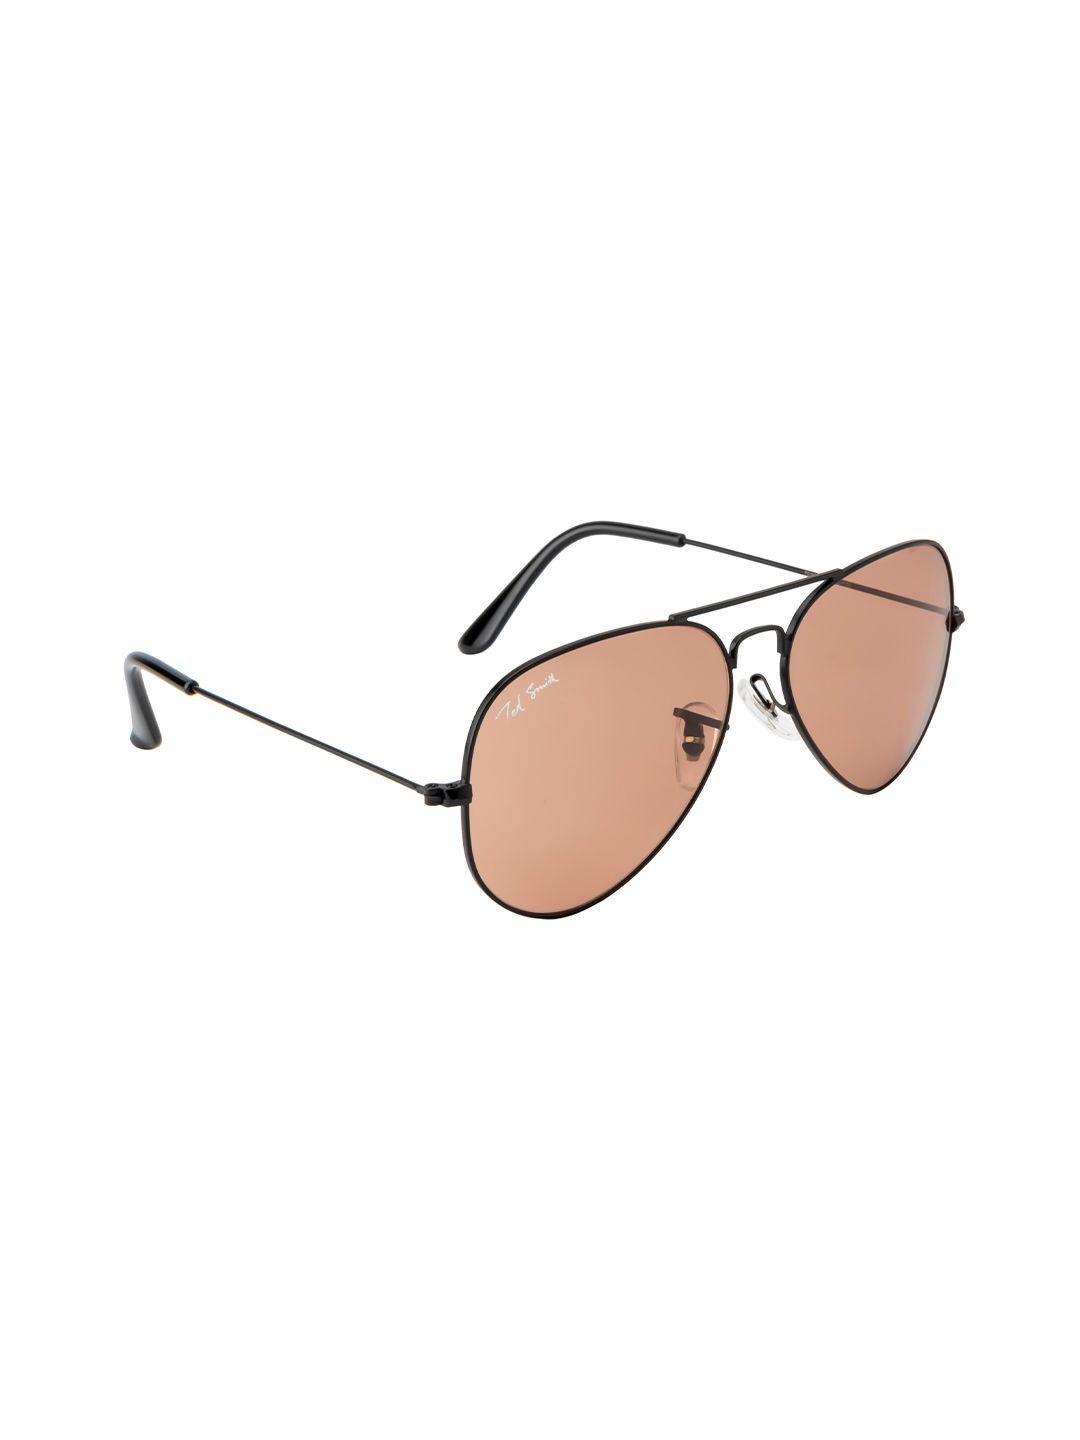 ted smith unisex beige lens & black aviator sunglasses with uv protected lens